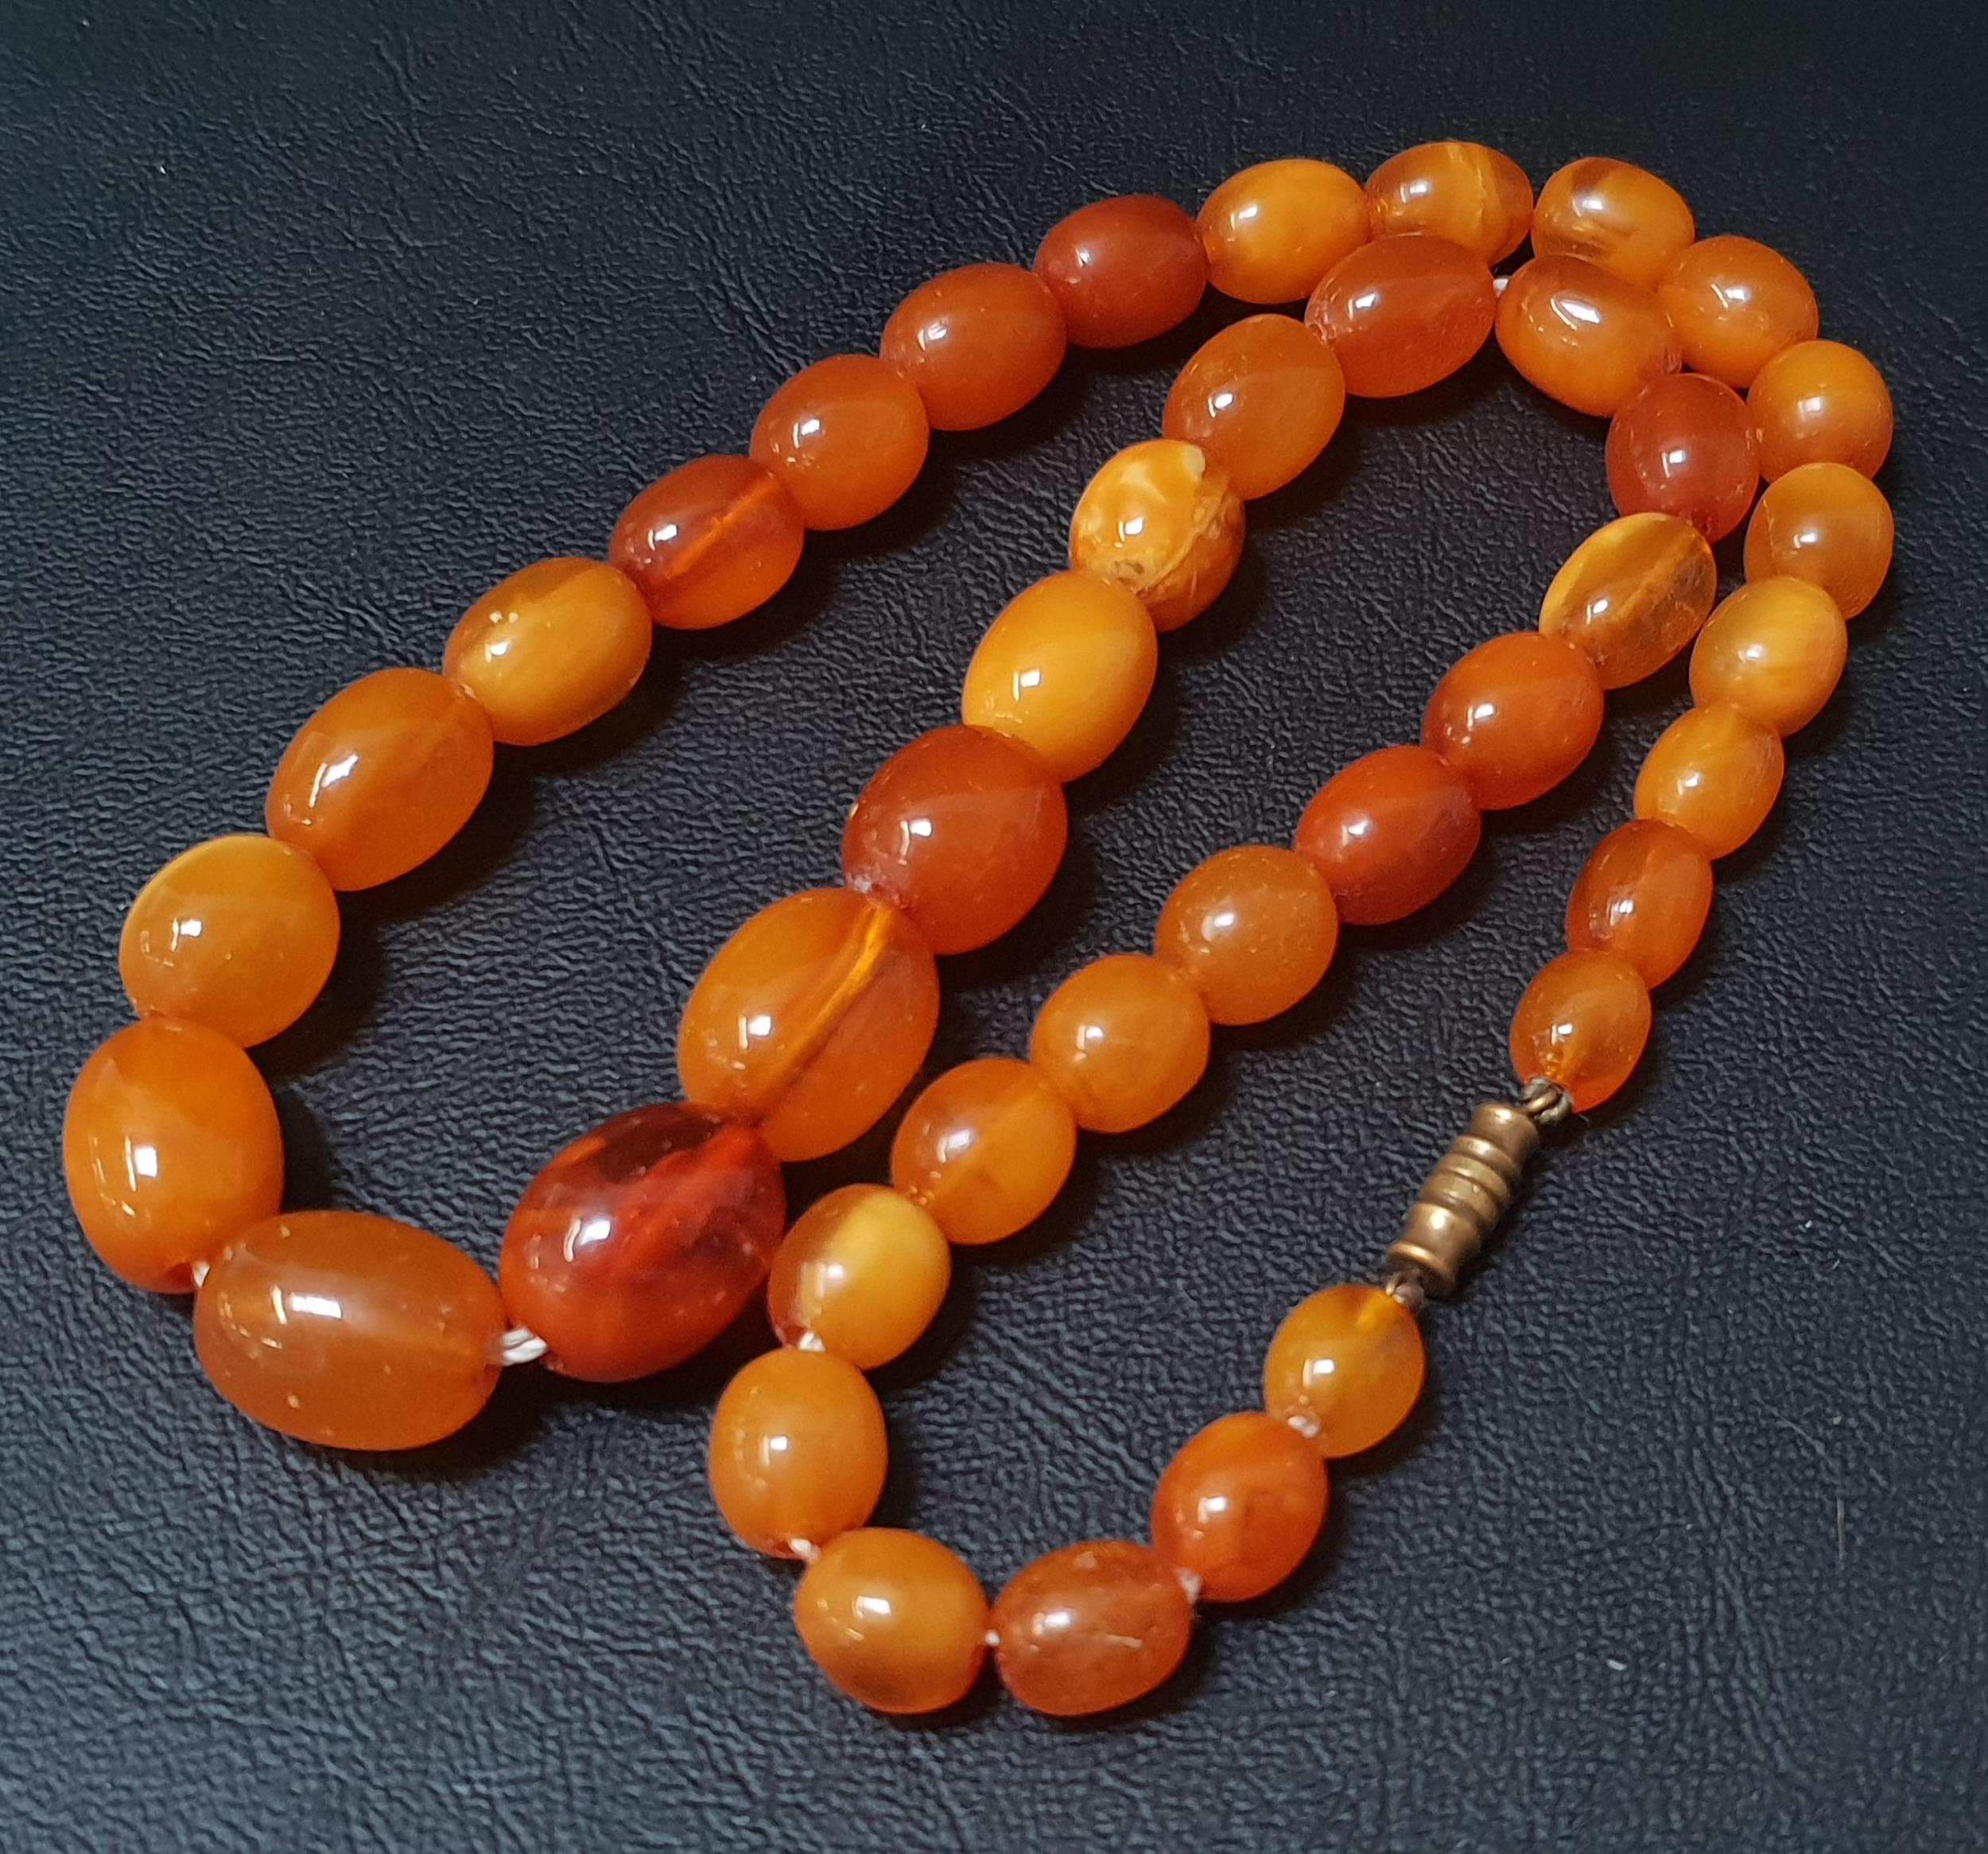 GRADUATED AMBER BEAD NECKLACE the largest bead approximately 1.5cm long, total weight